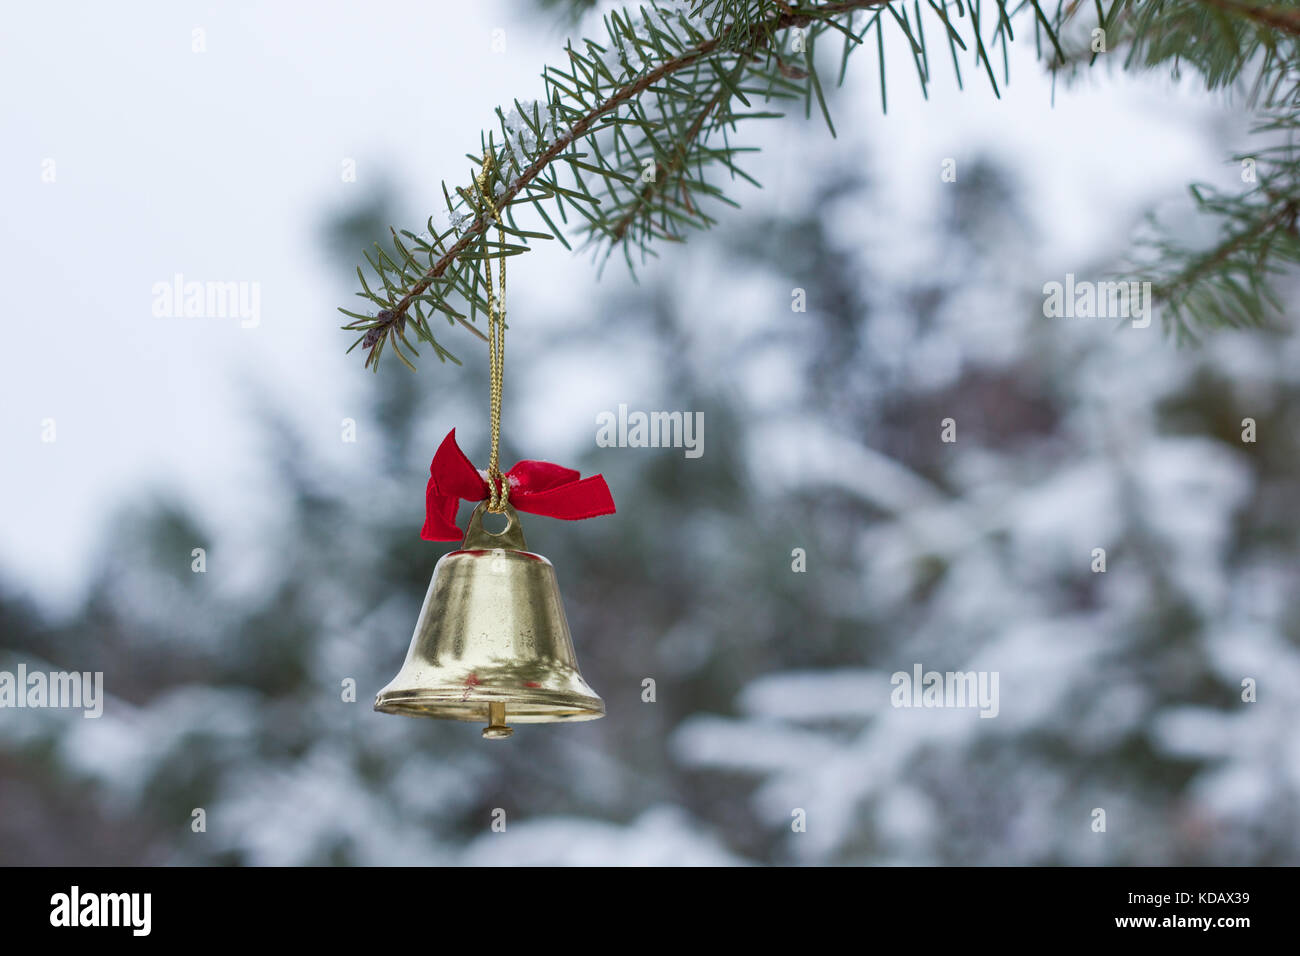 Gold bell with red ribbon on an evergreen tree branch outdoors on a snowy day Stock Photo